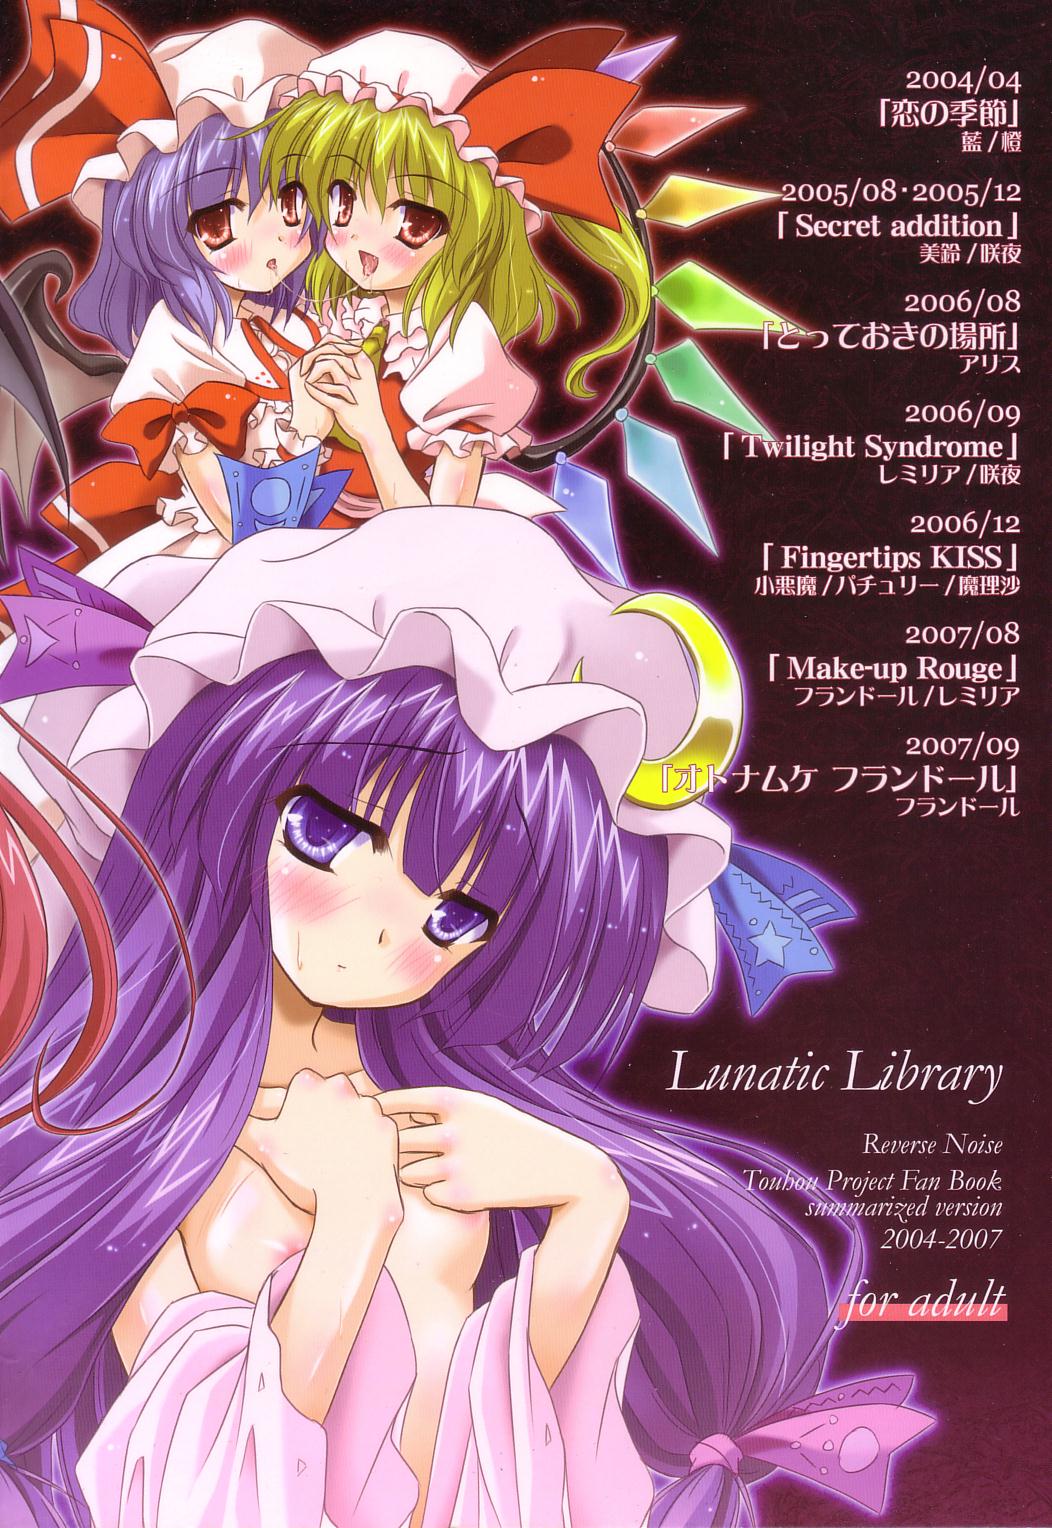 (C74) [Reverse Noise (やむっ)] Lunatic Library (東方Project)